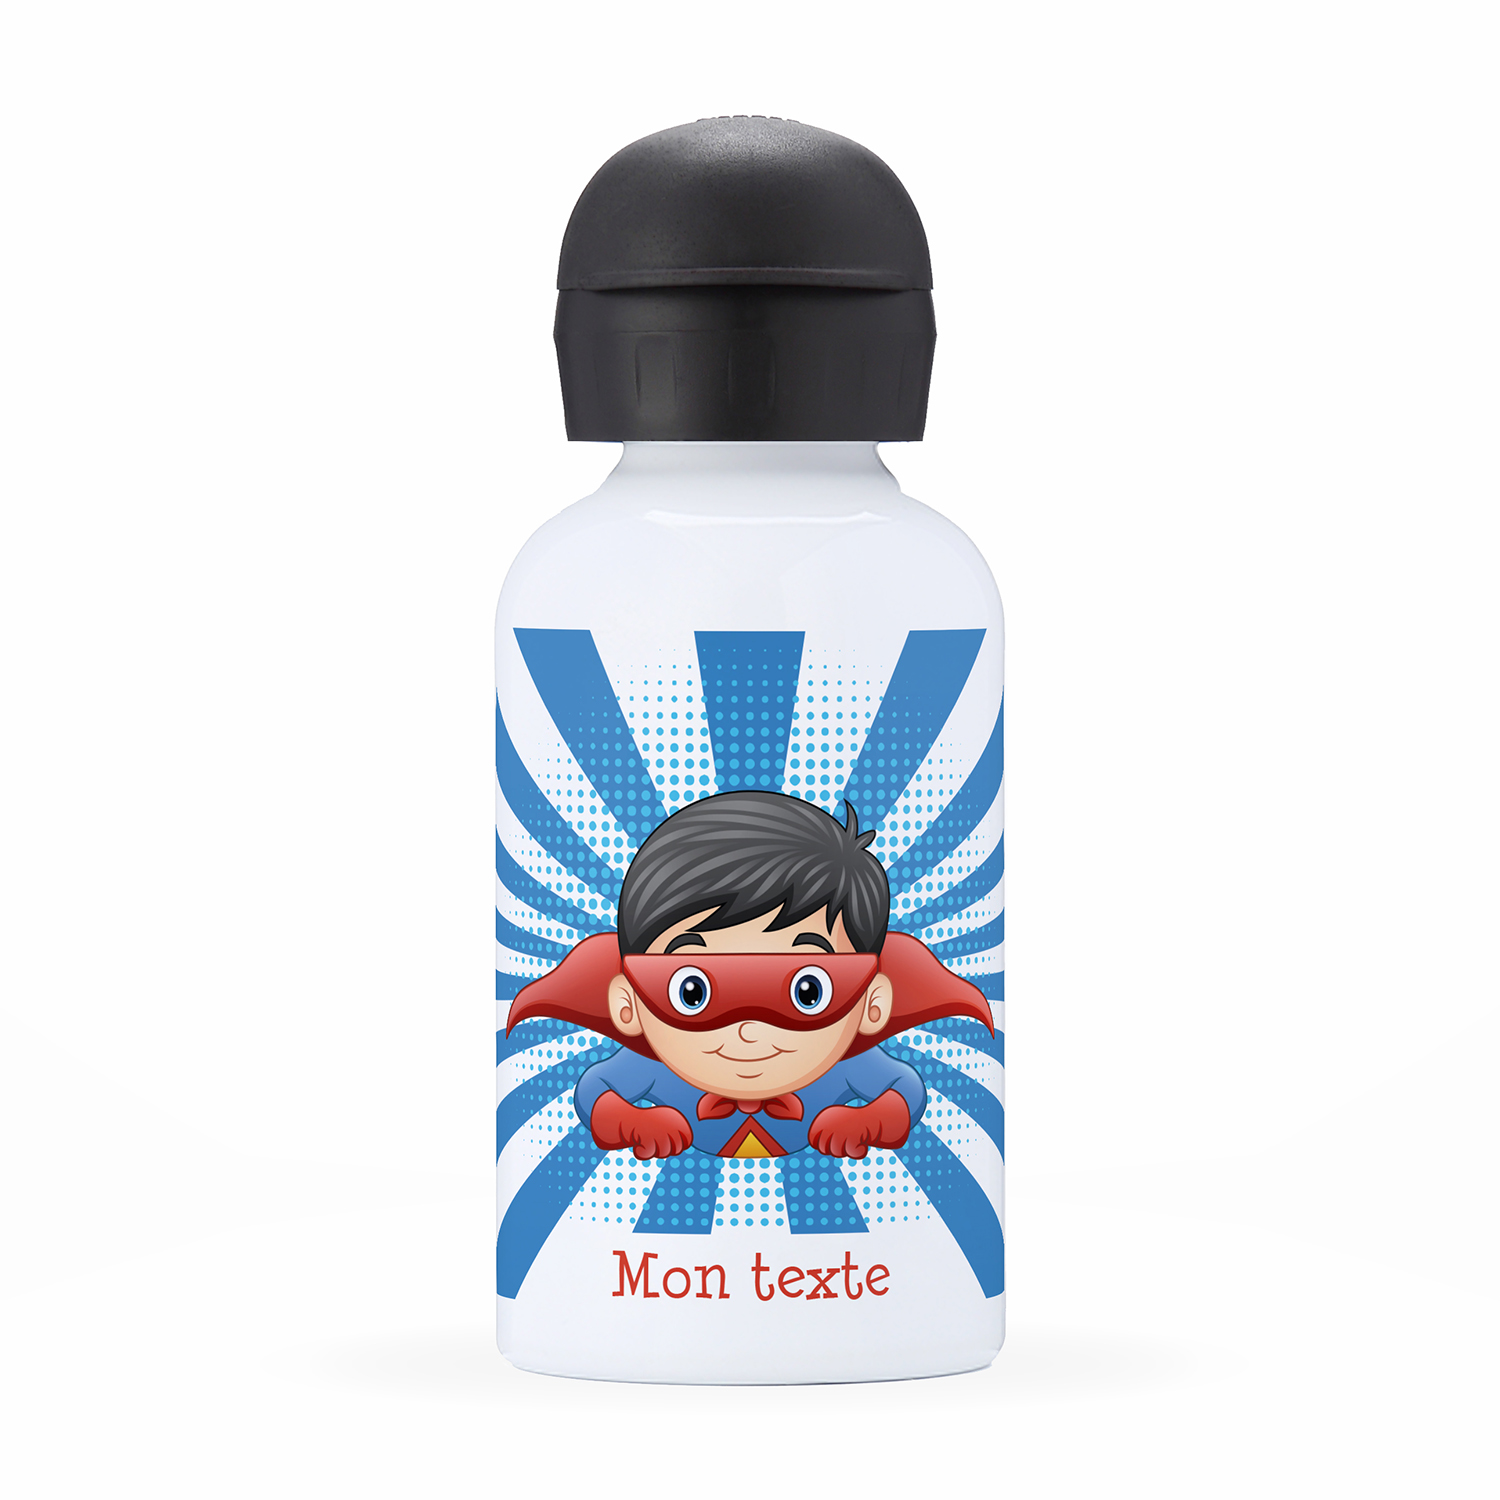 Labels Folies : Children's personalized insulated water bottle